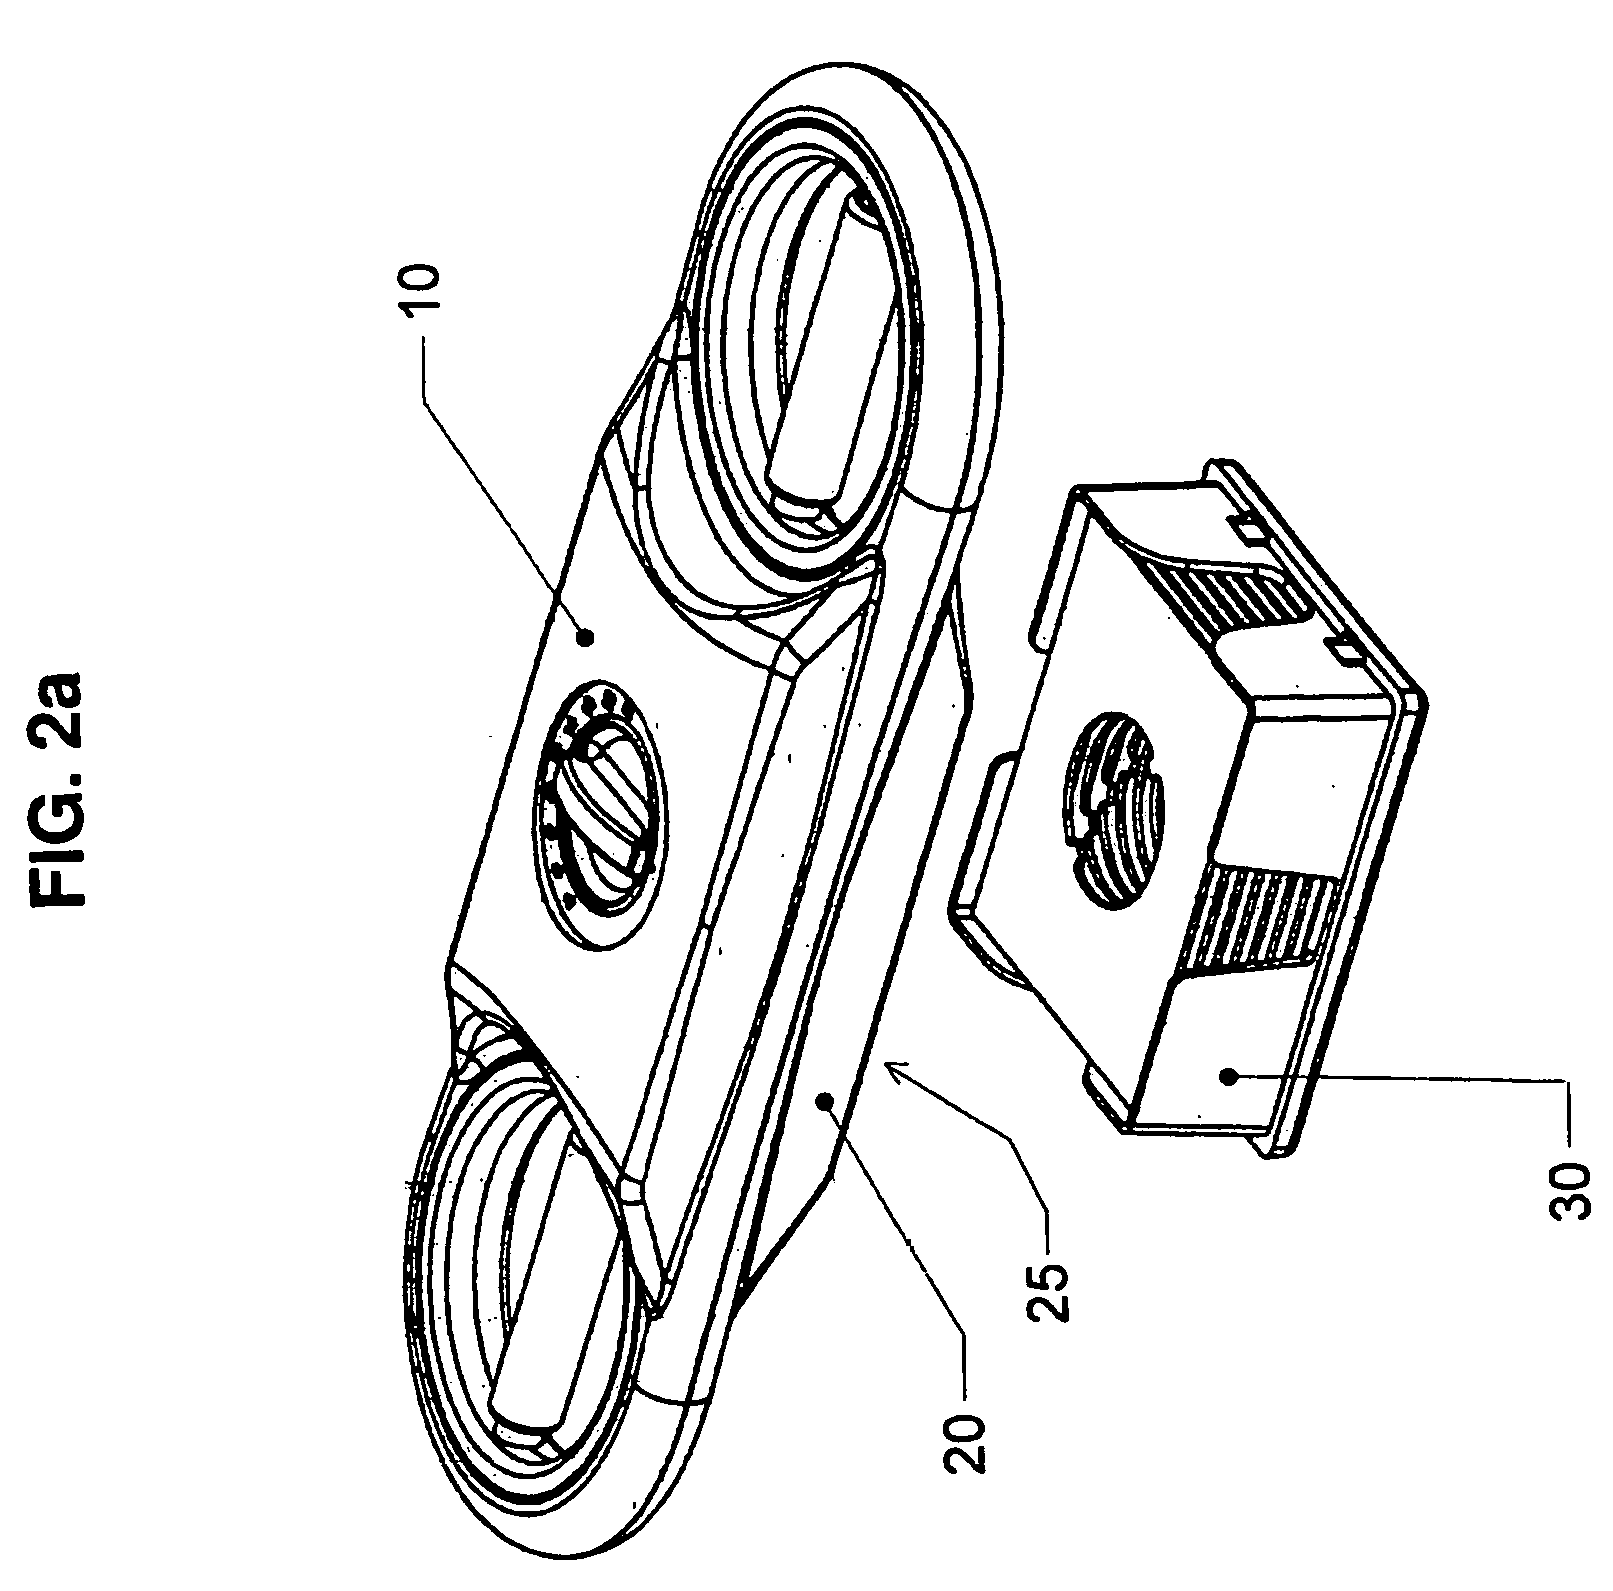 Exercise device with removable weight